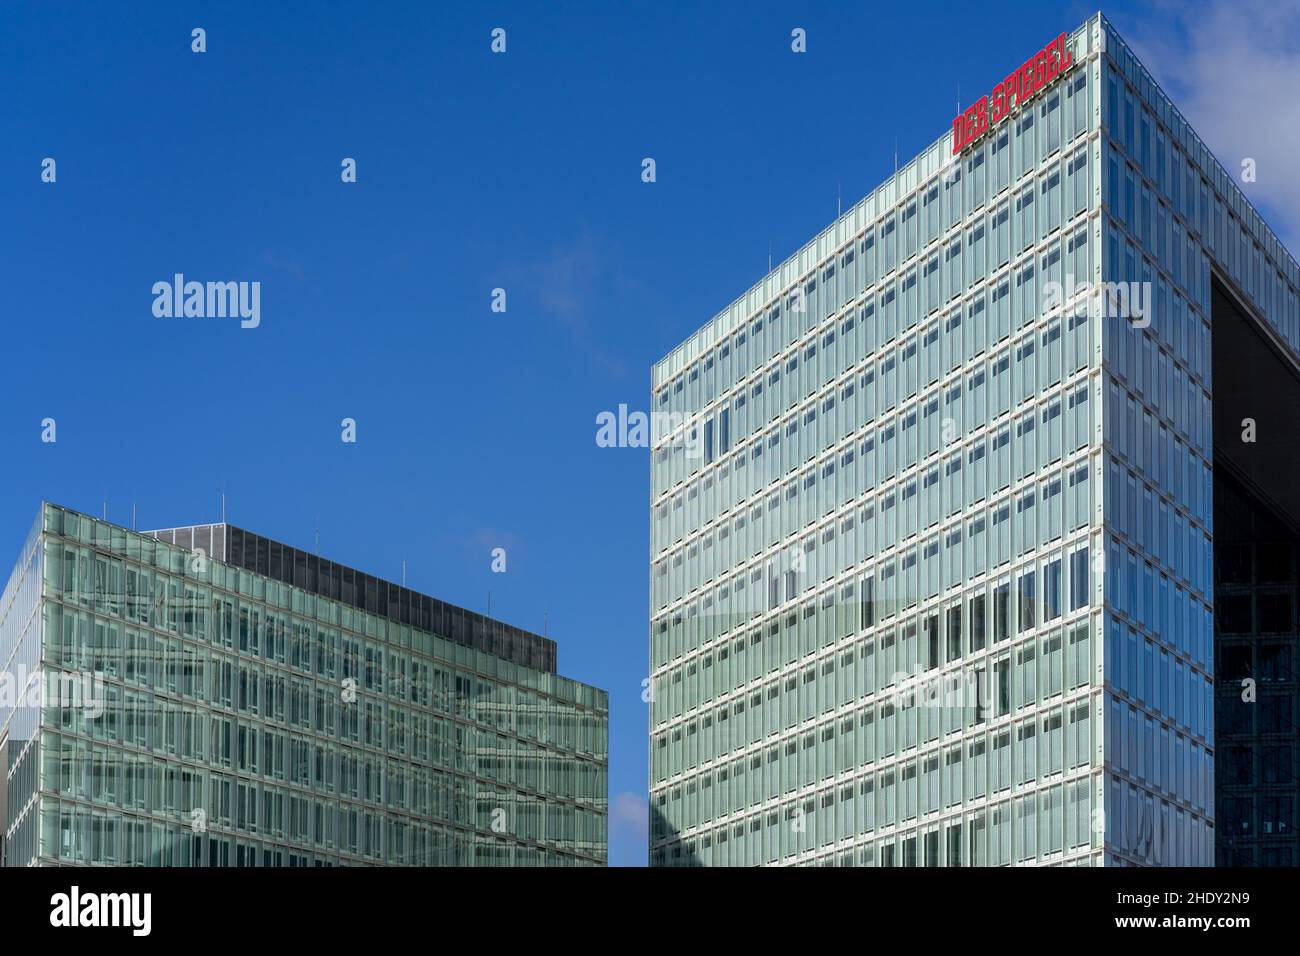 Hamburg, Germany - February 26, 2021: View at brand logo of Der Spiegel, a  famous weekly published german news magazine, mounted on top of modern offi  Stock Photo - Alamy